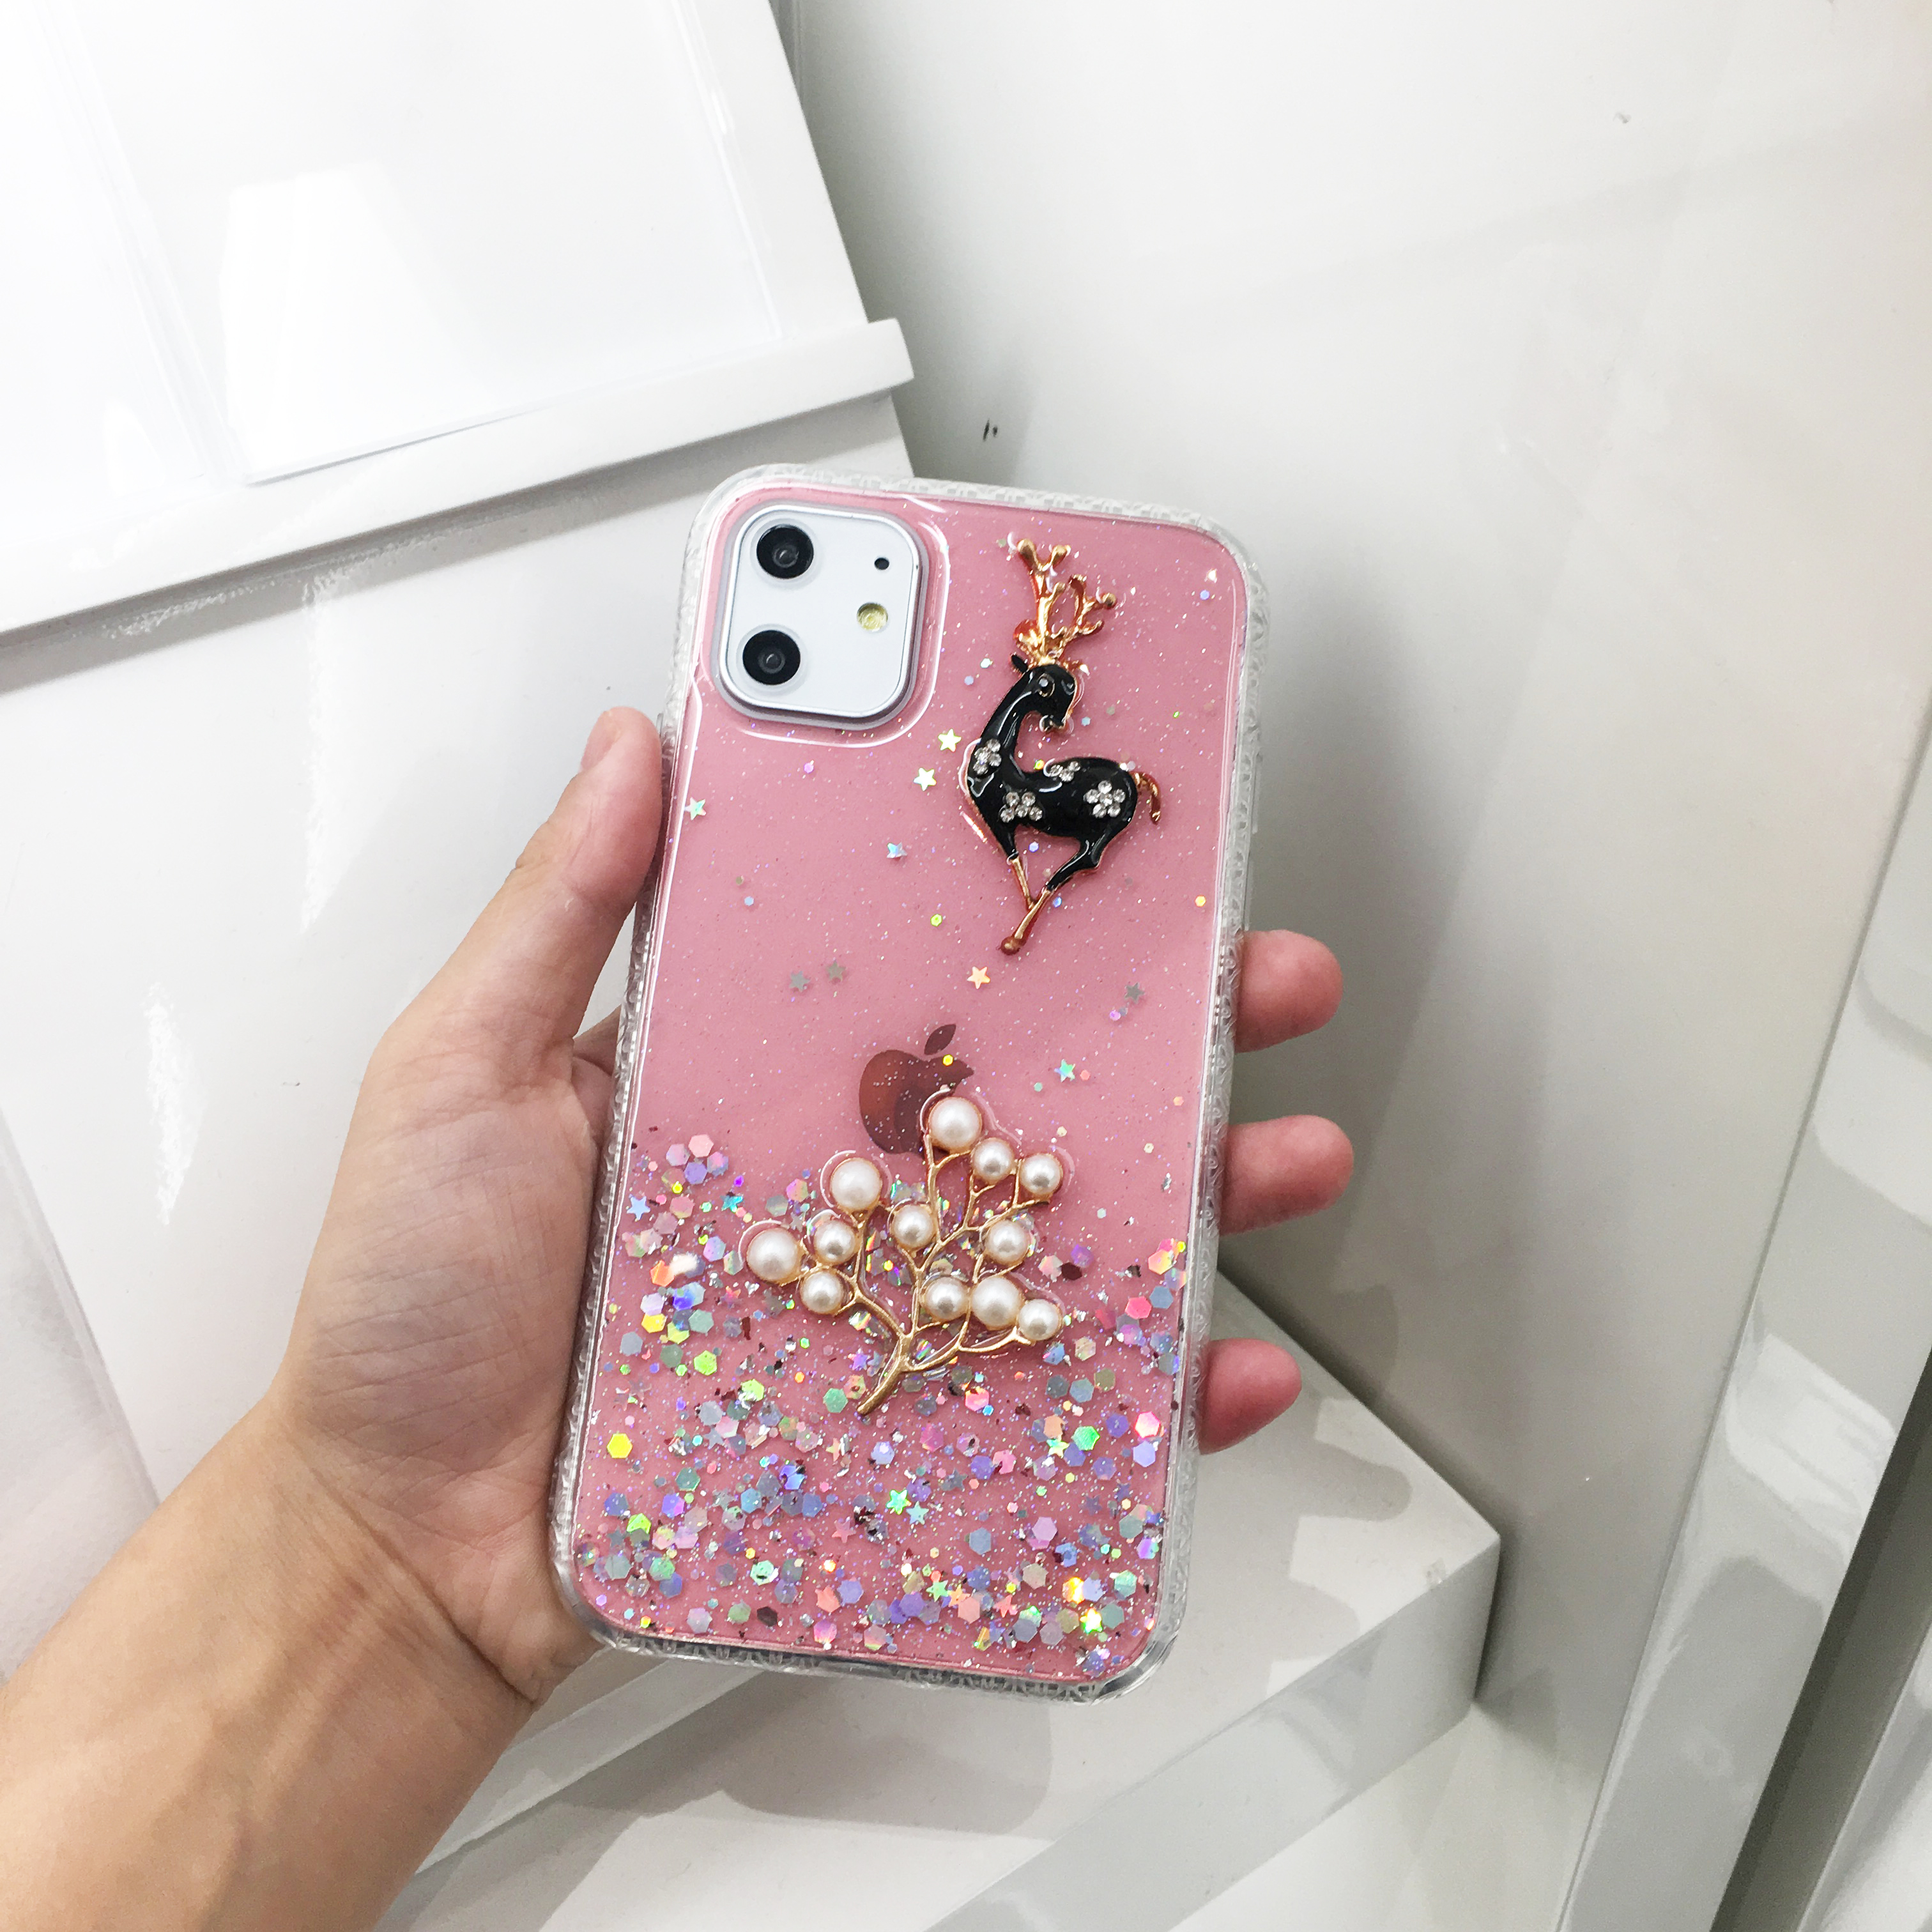 iPhone 11 Pro Max (6.5in) 3D Deer Crystal DIAMOND Shiny Case (Pink)